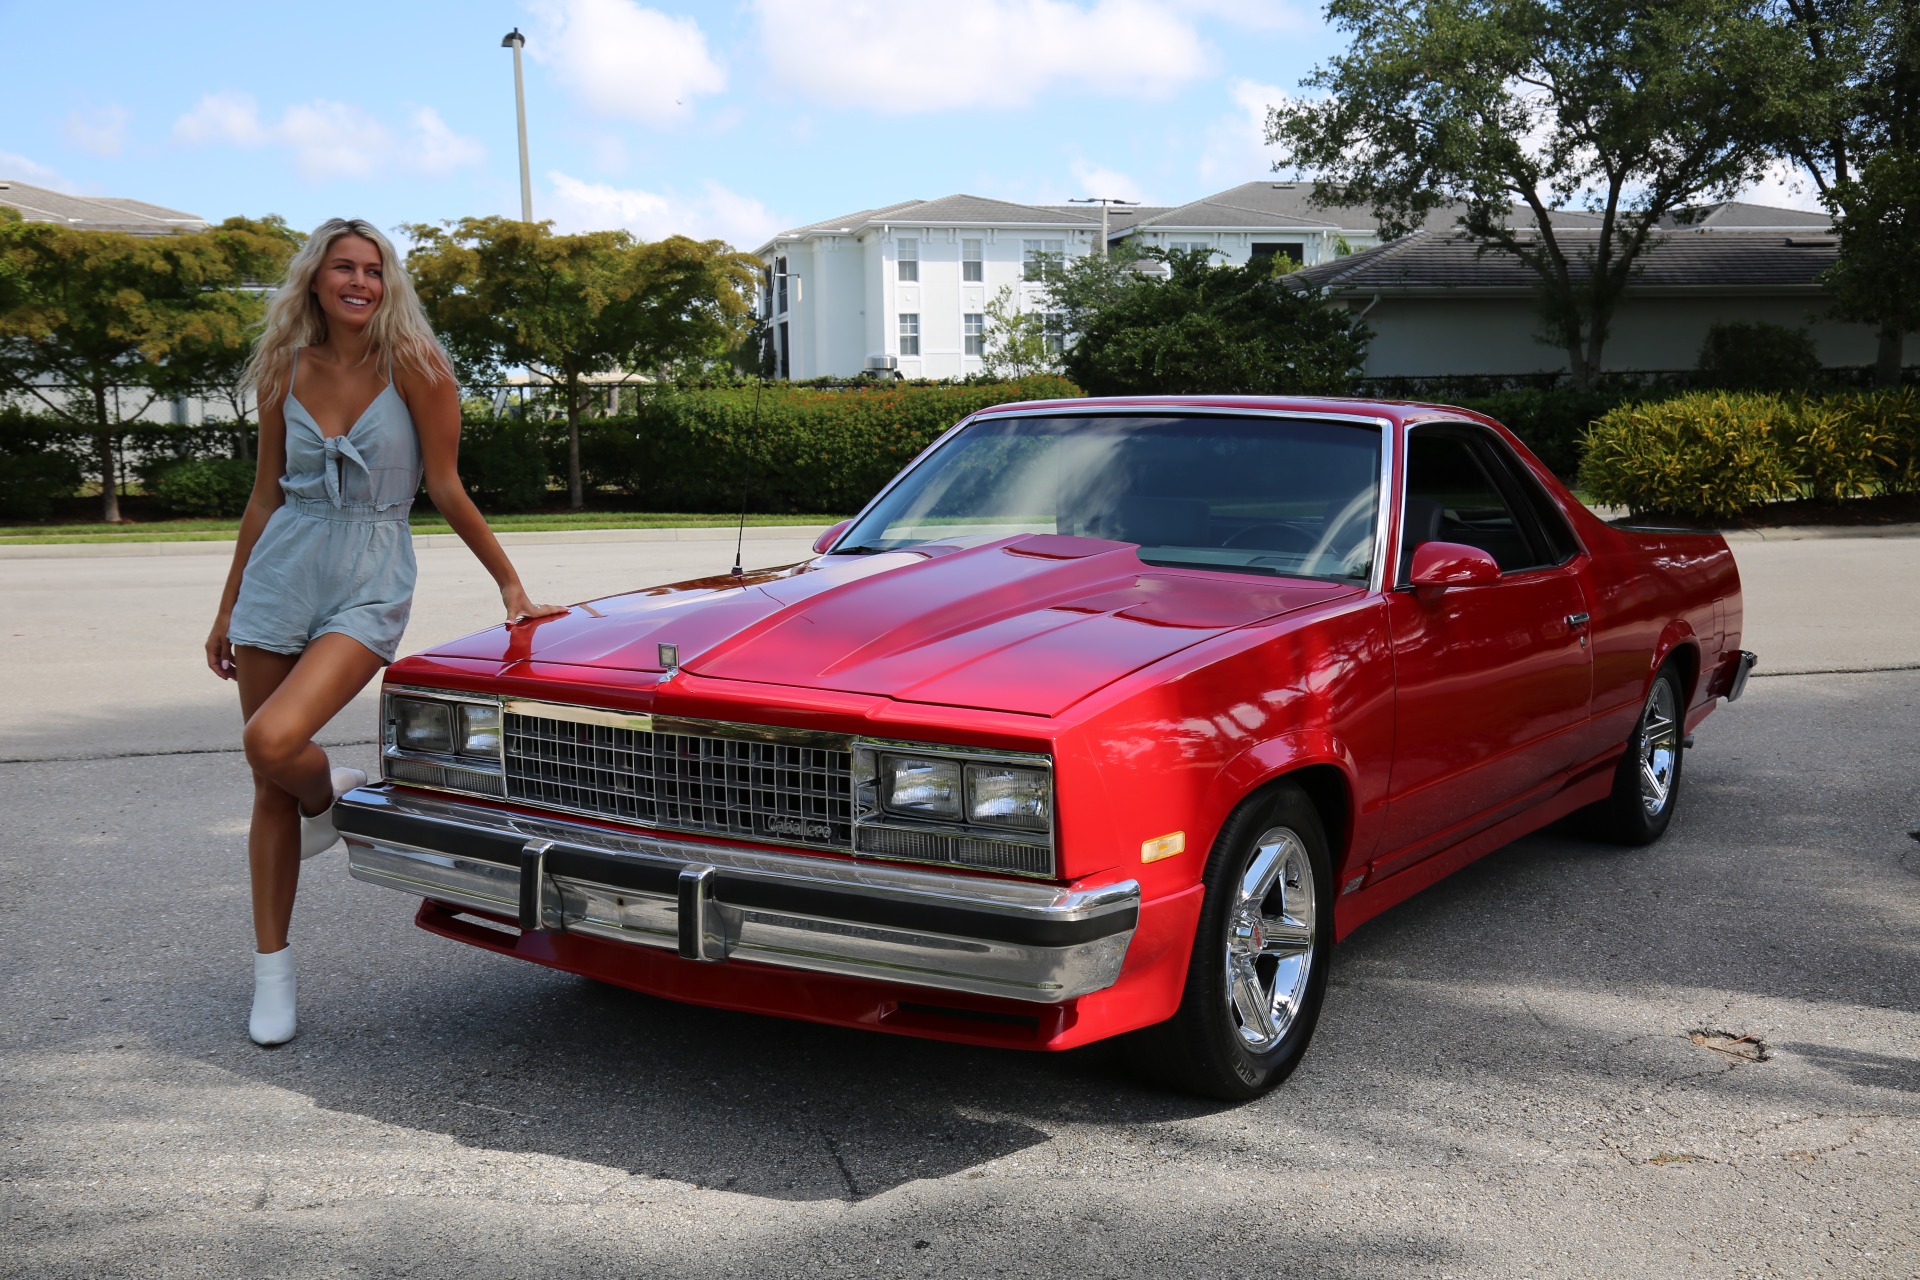 Used 1986 GMC Caballero LS Corvette Swap for sale Sold at Muscle Cars for Sale Inc. in Fort Myers FL 33912 8